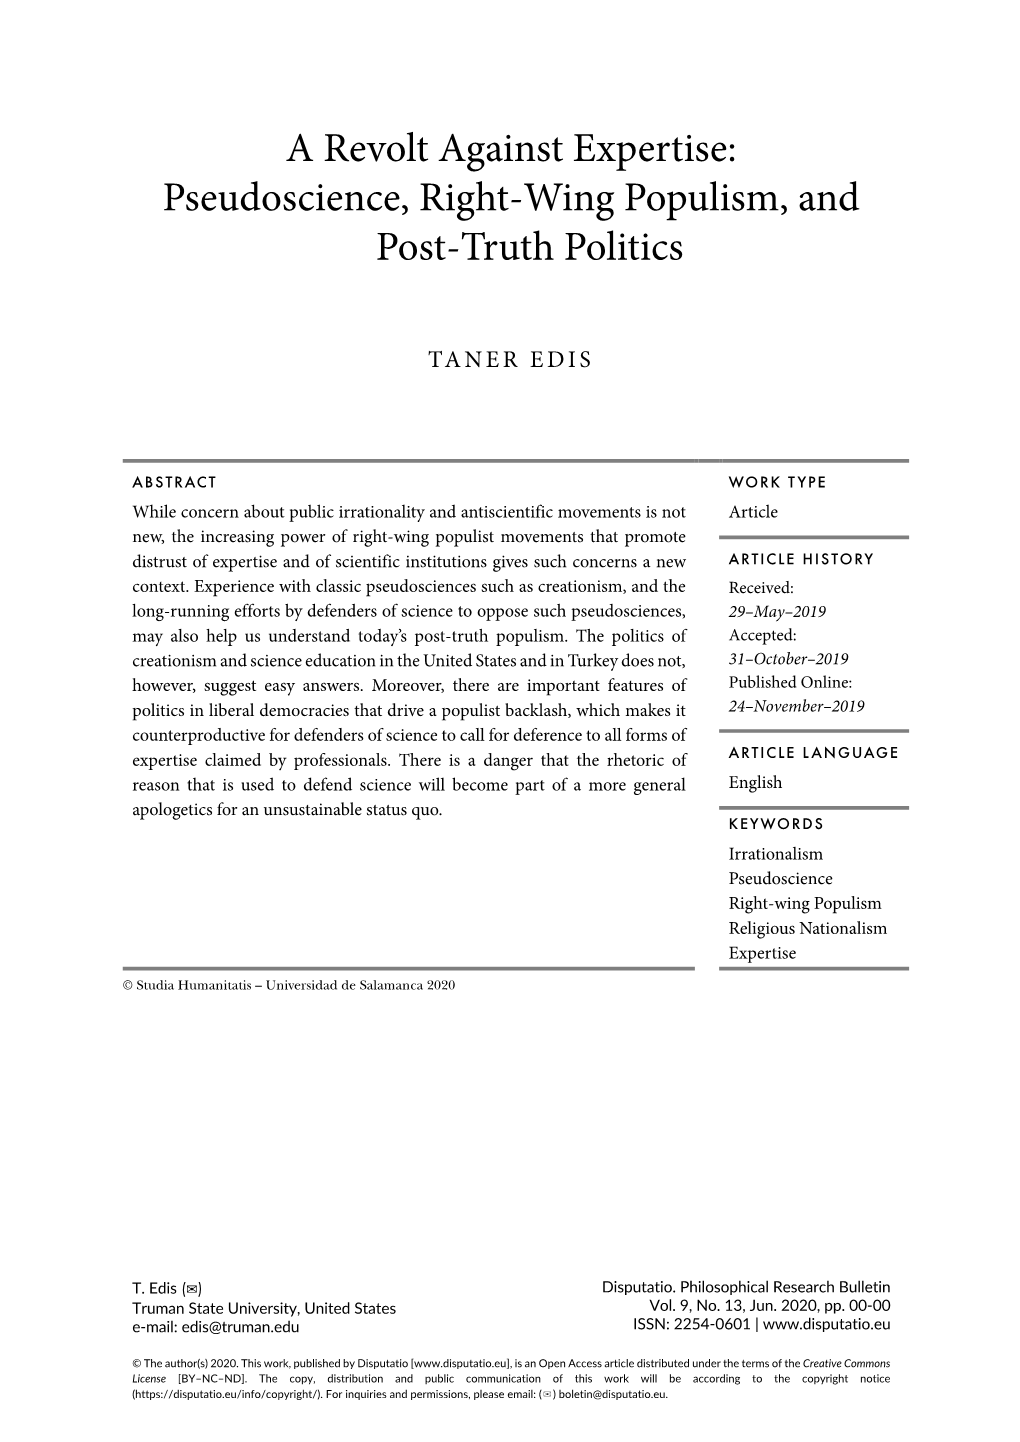 Pseudoscience, Right-Wing Populism, and Post-Truth Politics